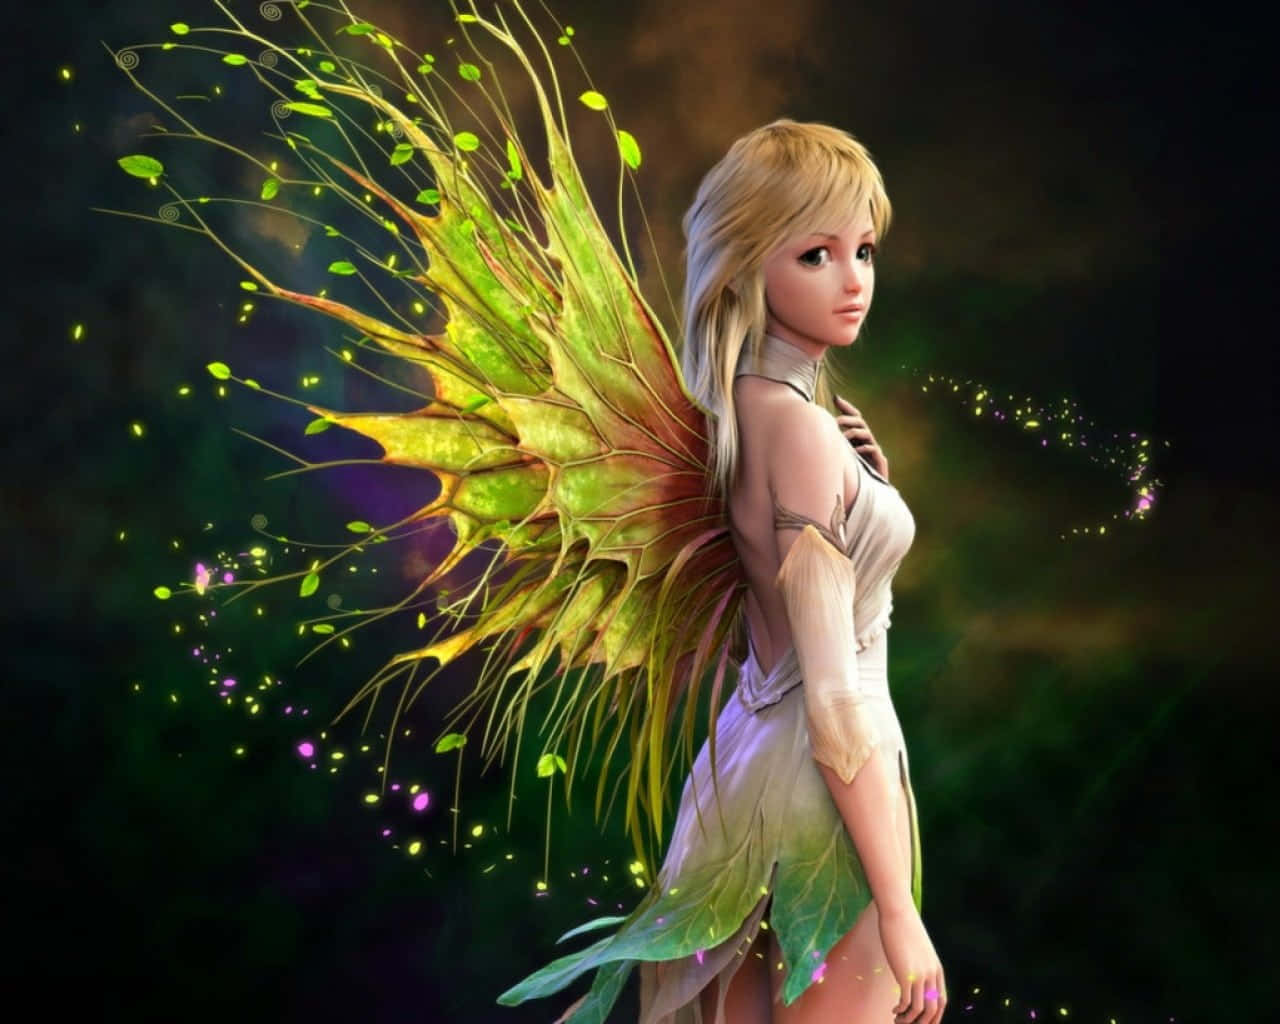 A whimsical fairy reveals her wings in a beautiful landscape surrounded by nature